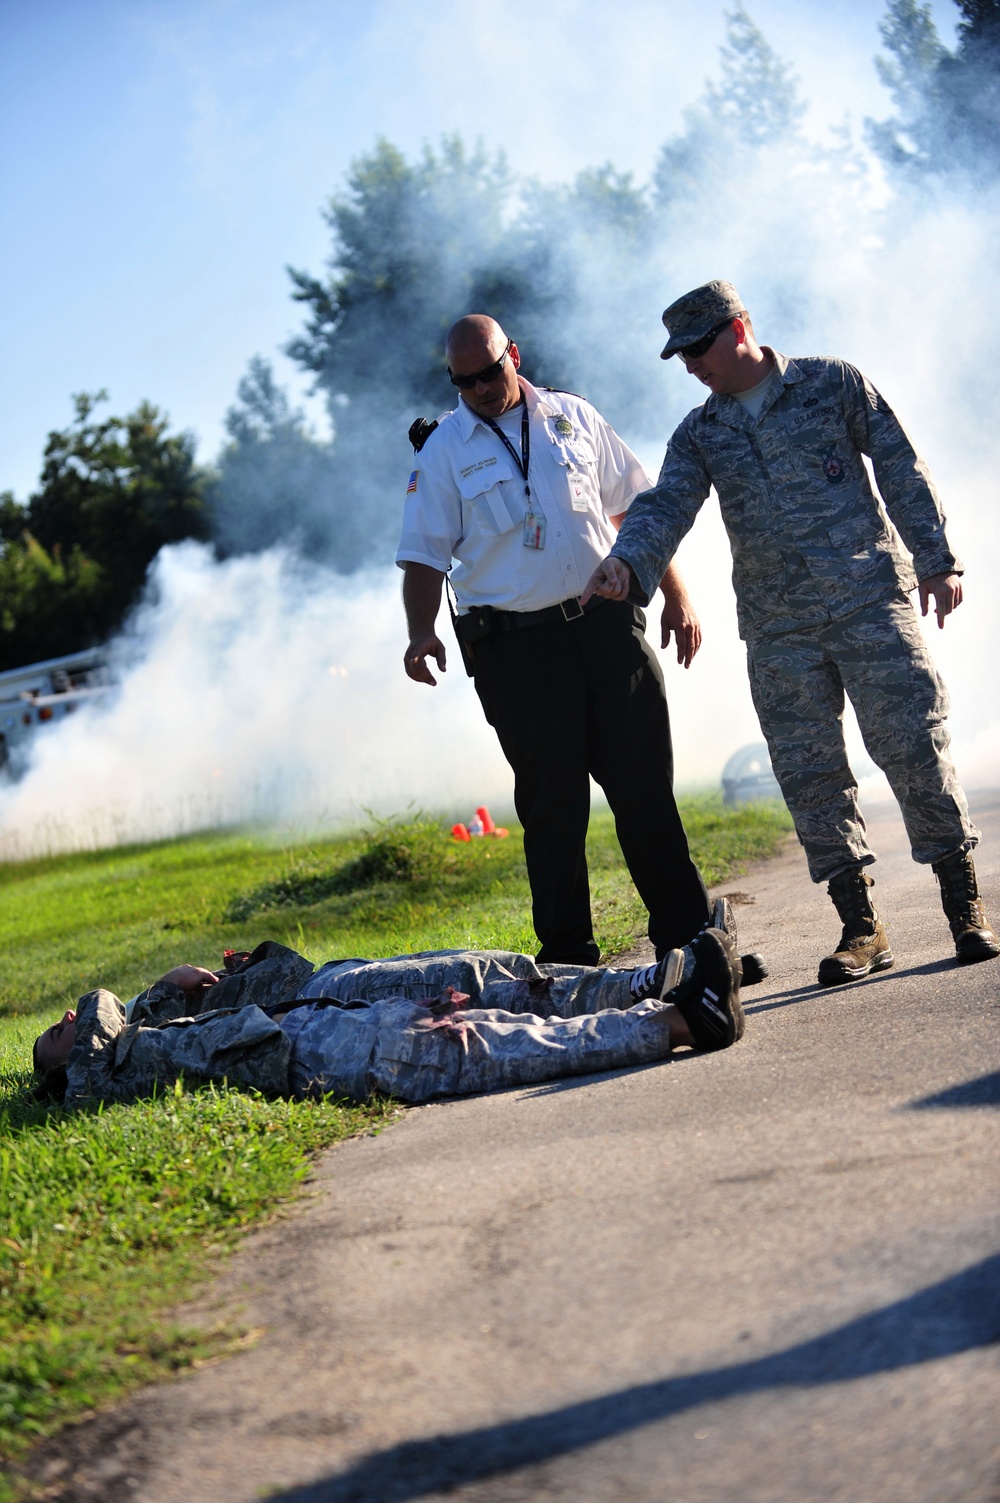 Seymour Johnson, local community team up to test accident response